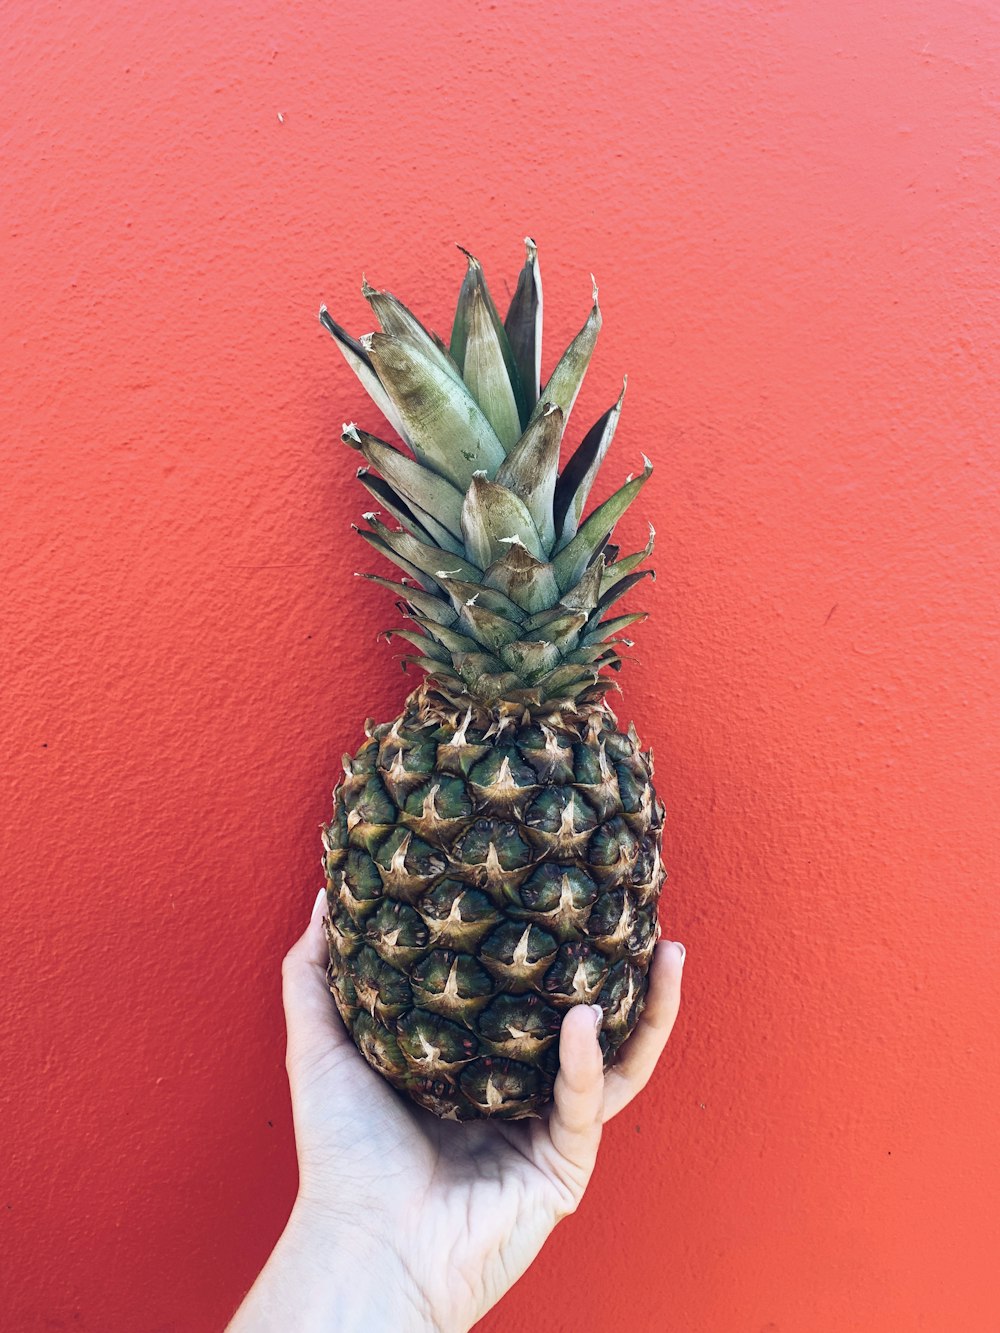 person holding pineapple fruit near red wall